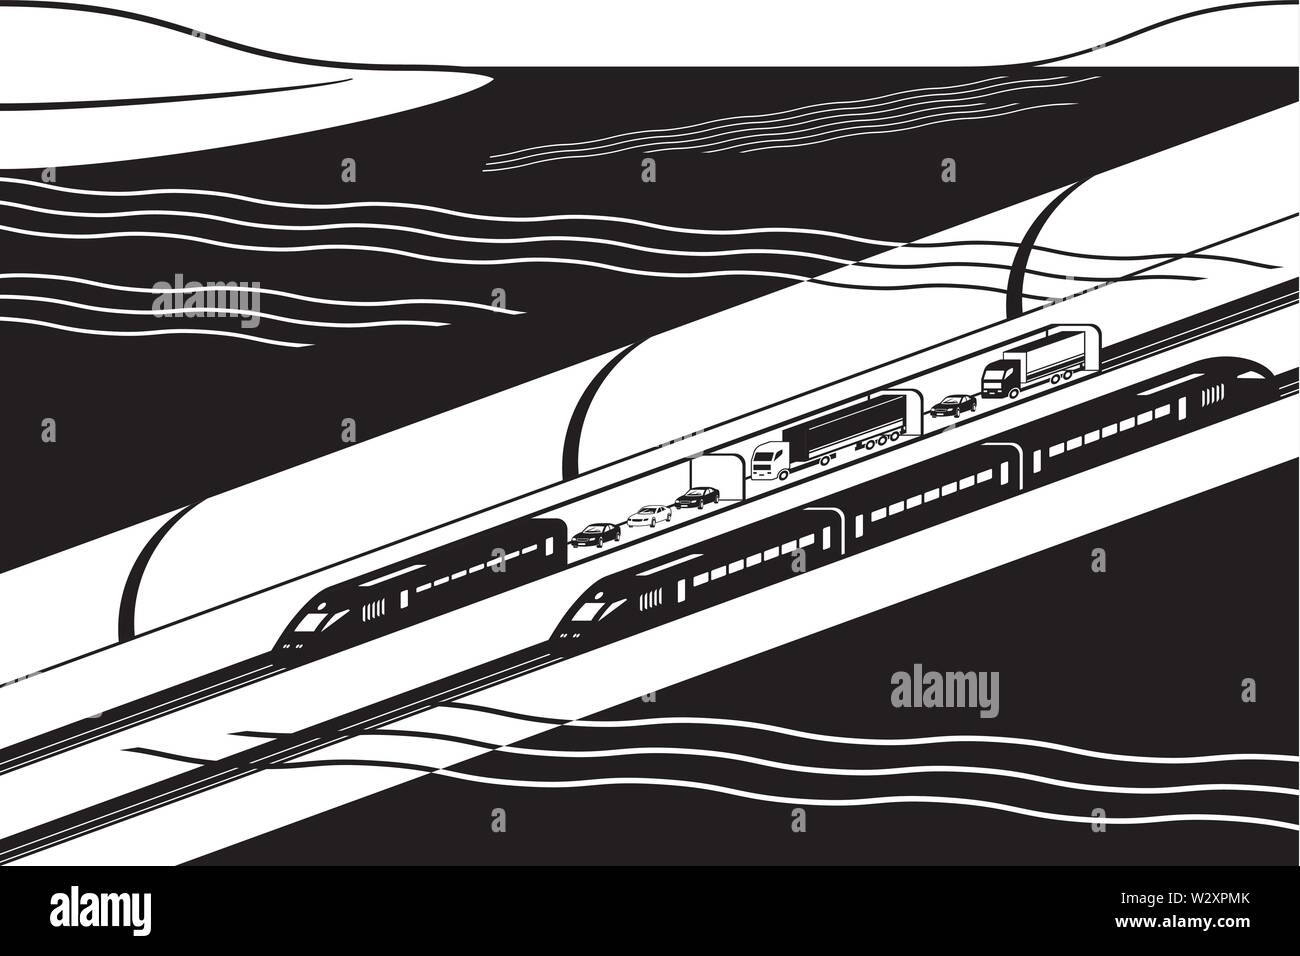 Underwater railway tunnel  with freight and passenger trains - vector illustration Stock Vector